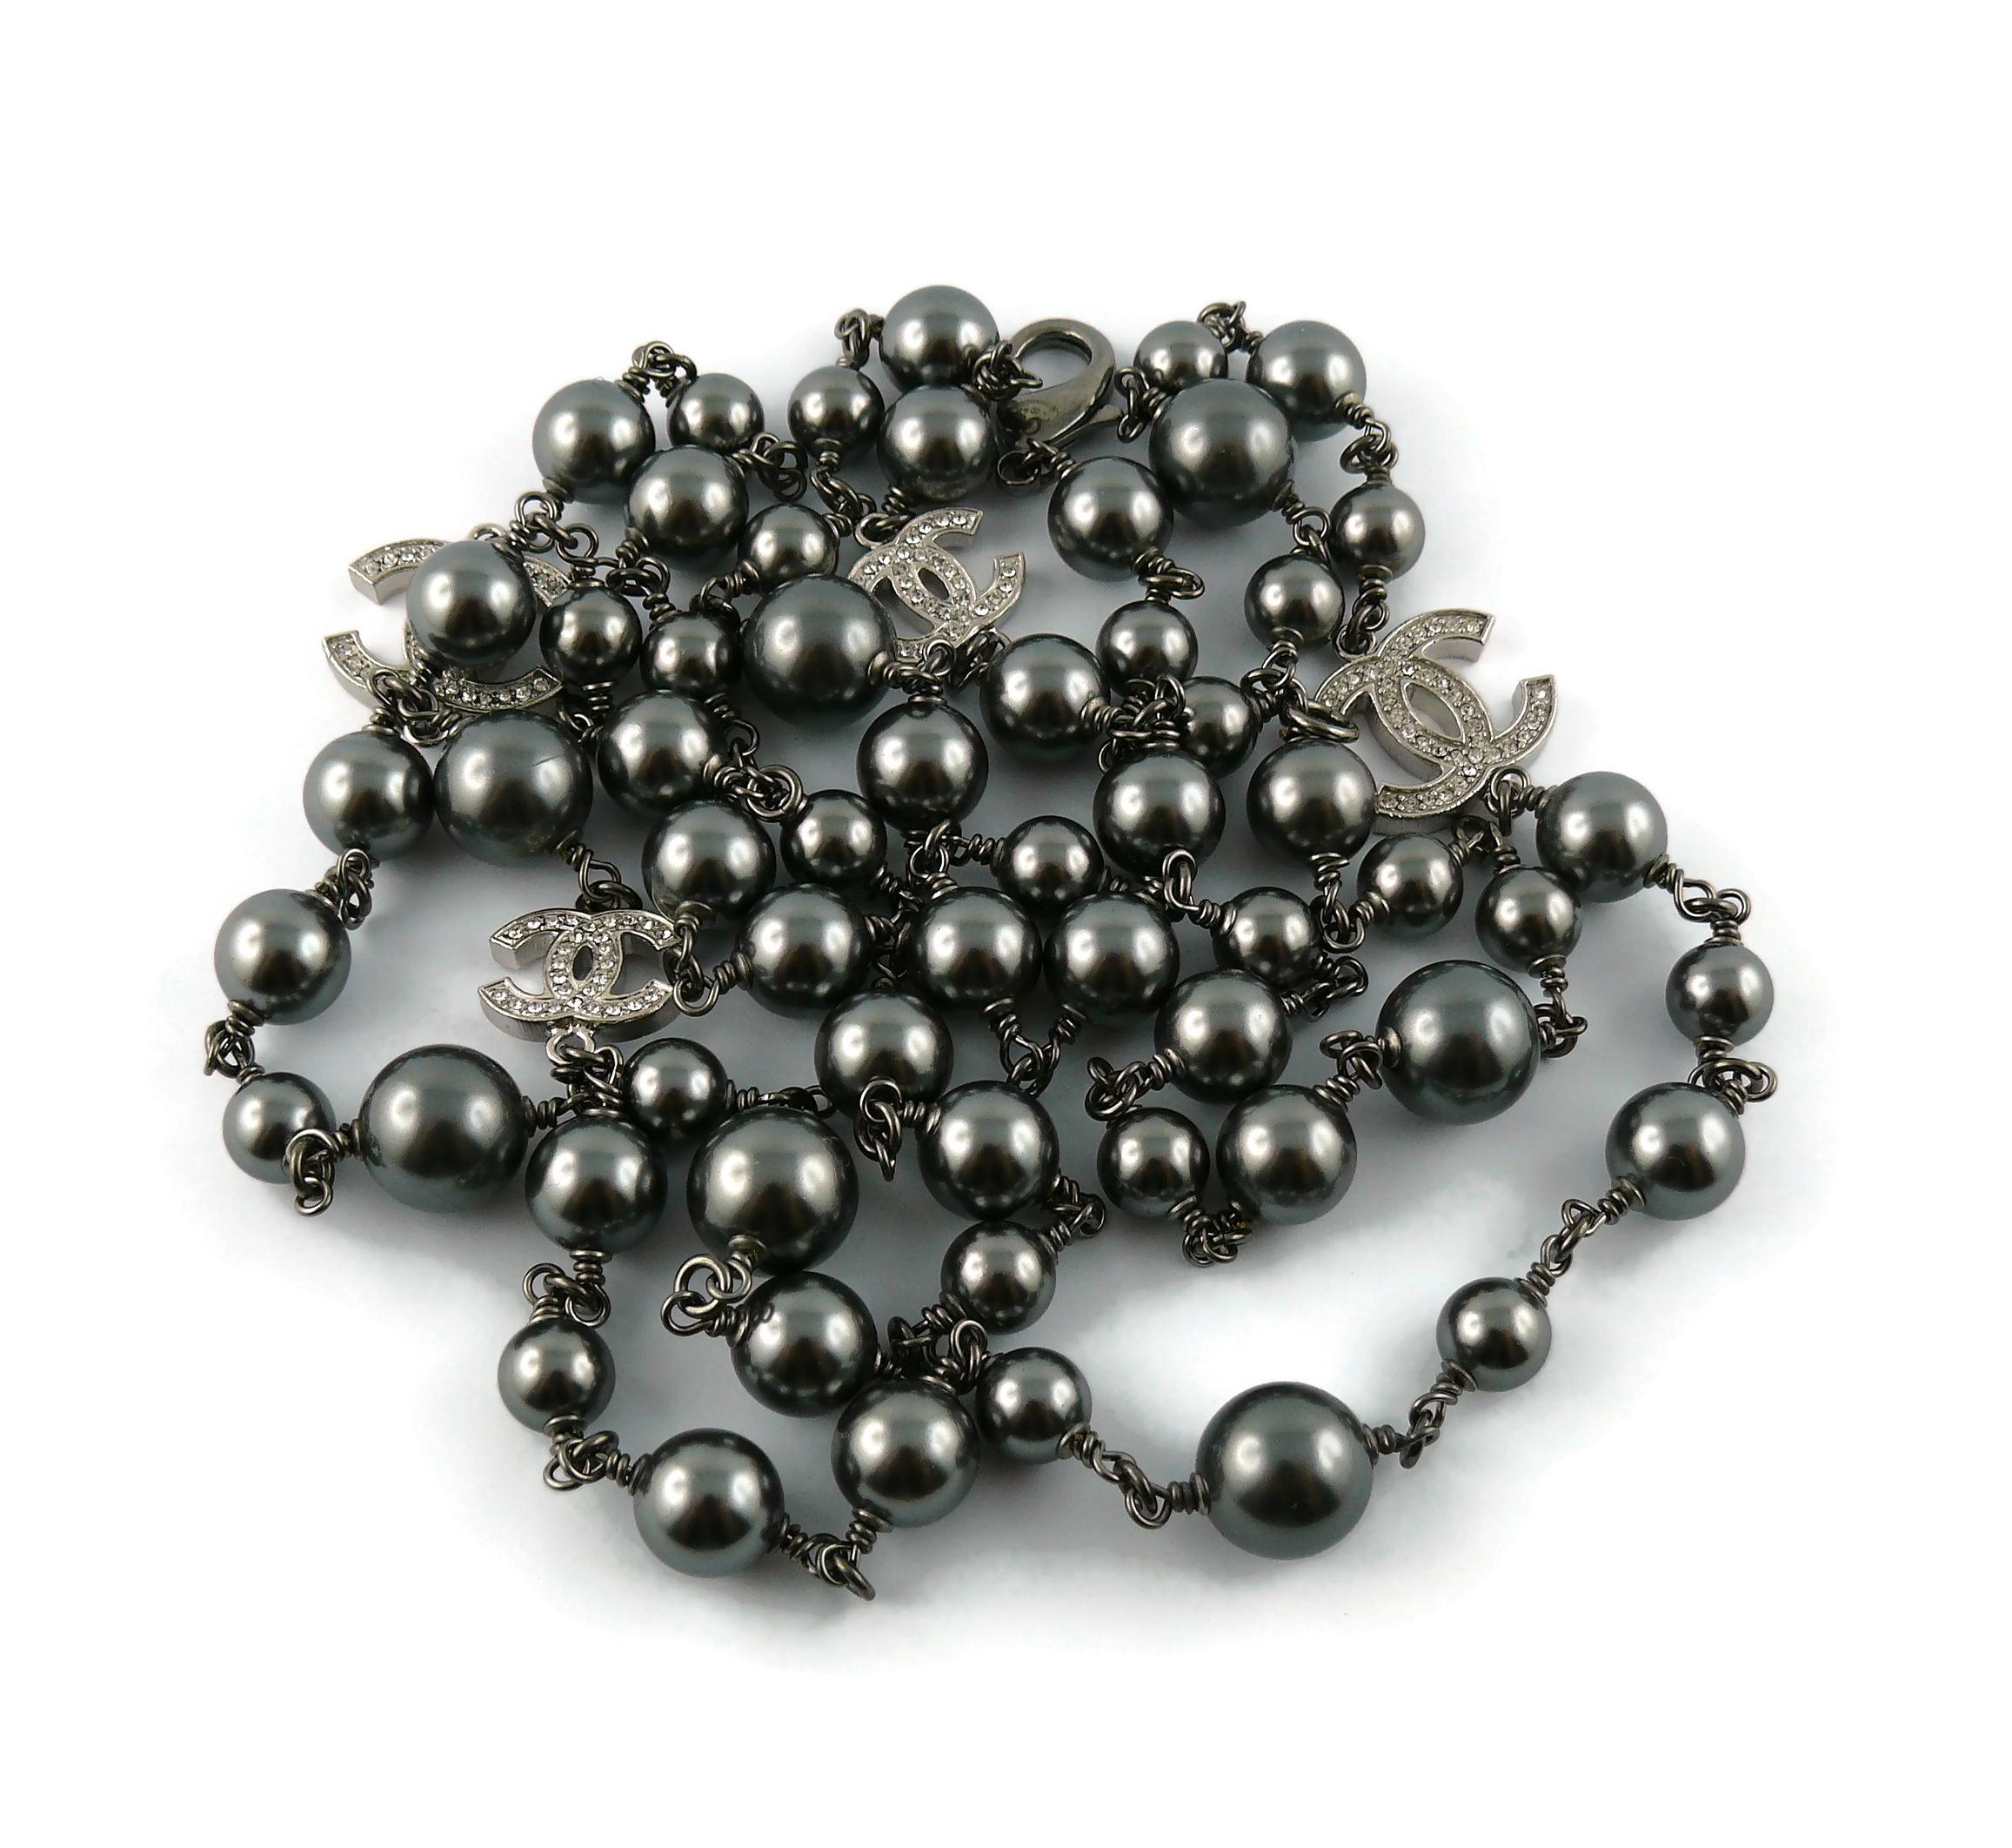 CHANEL necklace featuring a strand of hematite grey color faux pearls with four silver toned graduated CHANEL CC logos embellished with clear crystals. 

Ruthenium hardware.

This necklace can be wrapped three times around the neck.

Lobster clasp